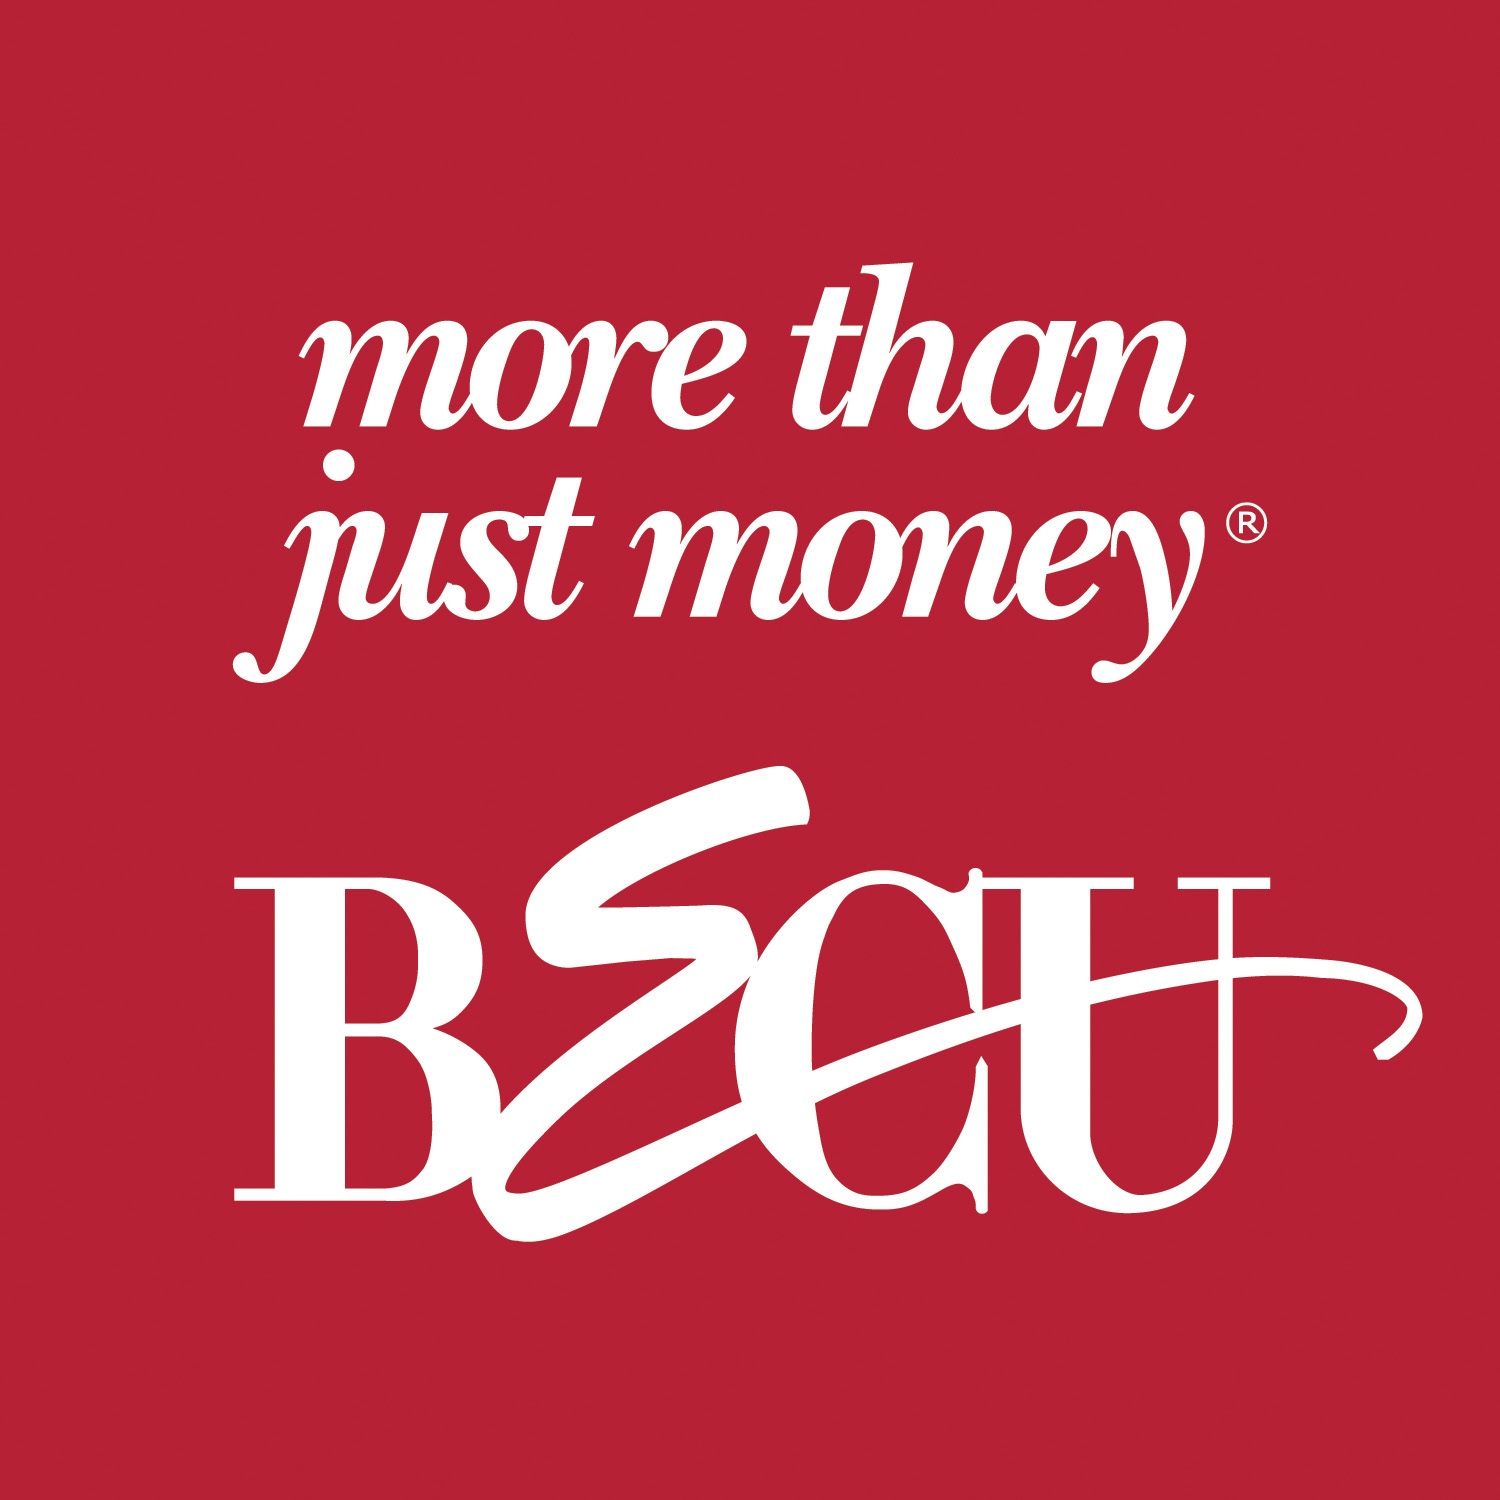 Becu Opens First Branches In Spokane Expanding Its Members First Philosophy East Of The Cascades Business Wire